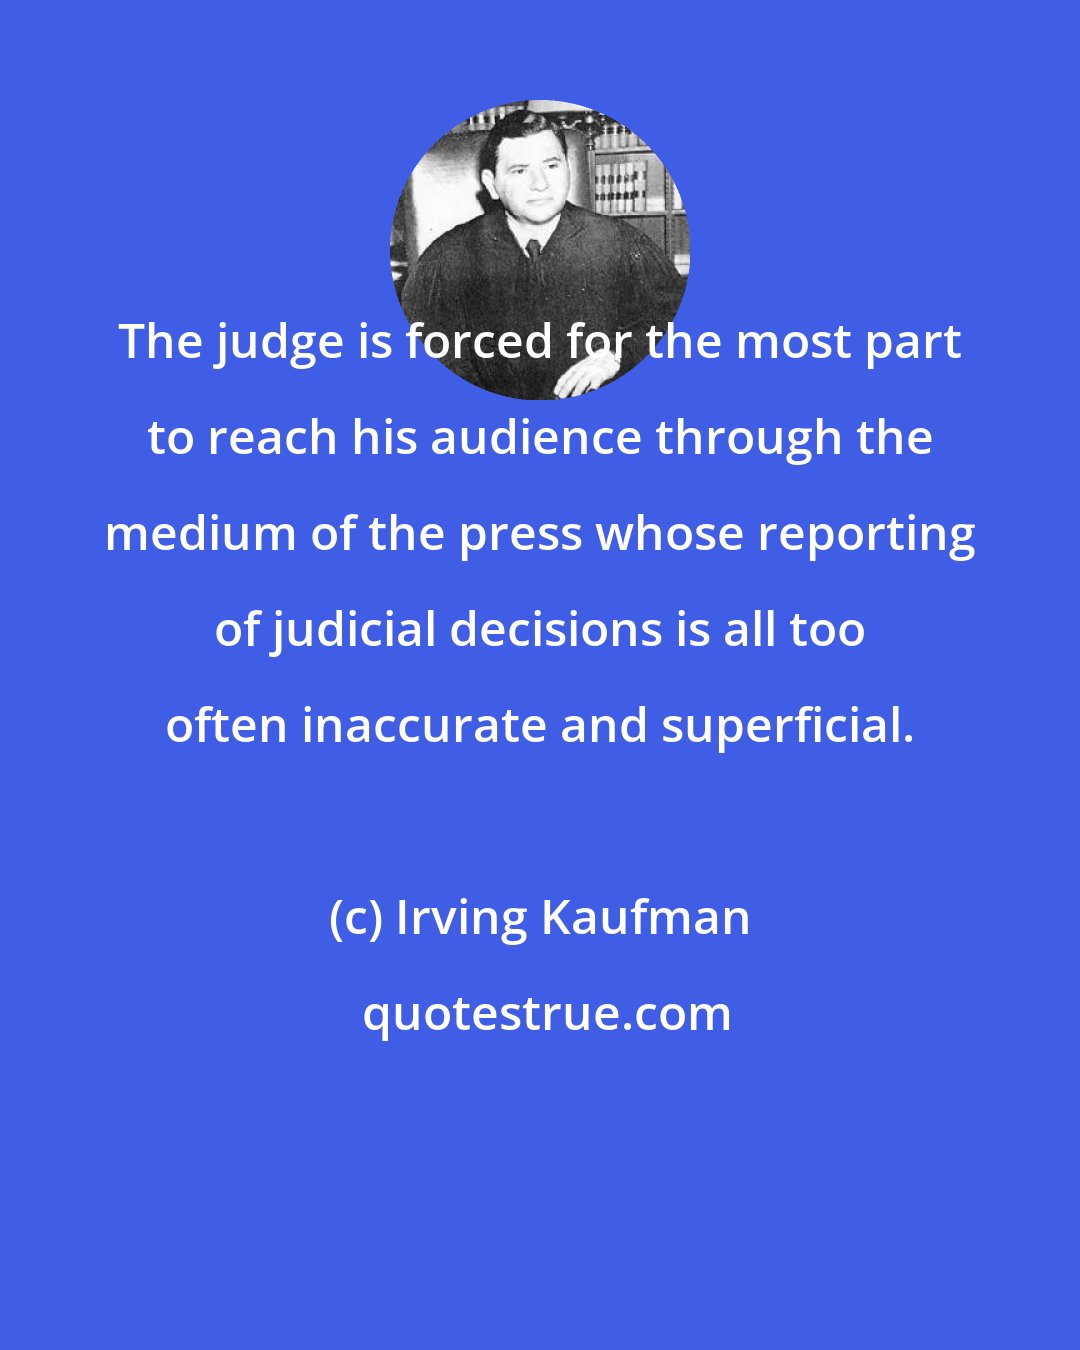 Irving Kaufman: The judge is forced for the most part to reach his audience through the medium of the press whose reporting of judicial decisions is all too often inaccurate and superficial.